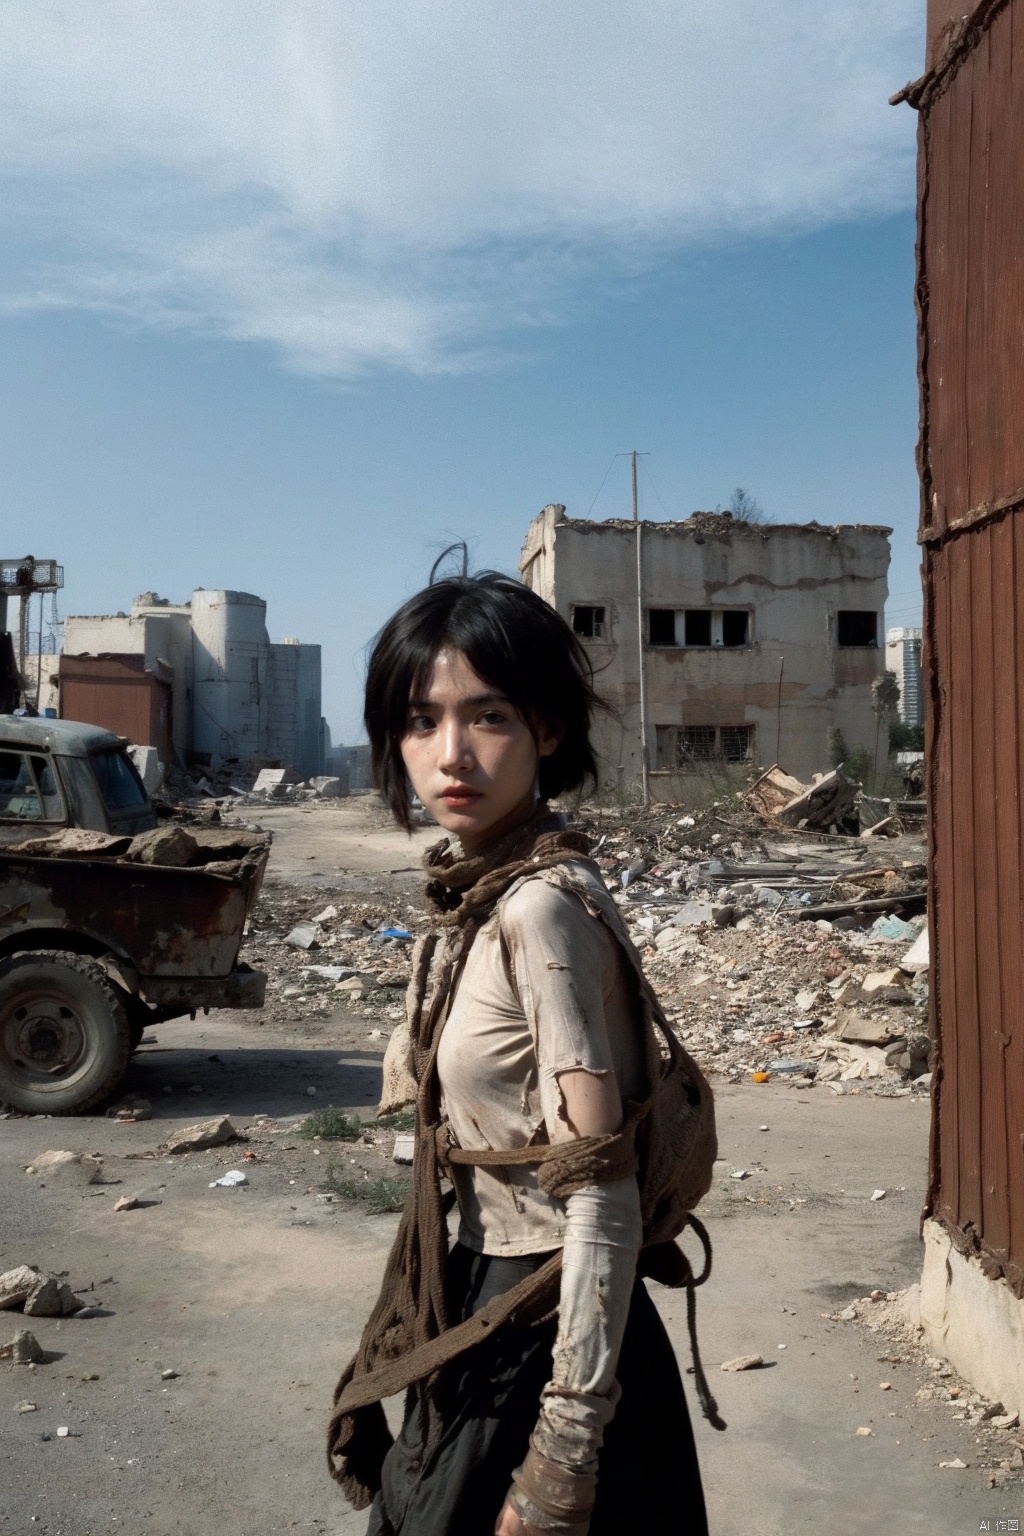 Envision a low-poly game art featuring a solitary girl in a post-apocalyptic setting. She's a survivor,dressed in makeshift armor crafted from remnants of the old world. The background is a desolate urban landscape,with crumbling buildings and abandoned vehicles. The scene is tinged with hues of orange and red,reflecting the harshness of the environment. She carries a backpack full of scavenged supplies,her expression one of resilience and hope amidst the ruins,(film grain:1.2),